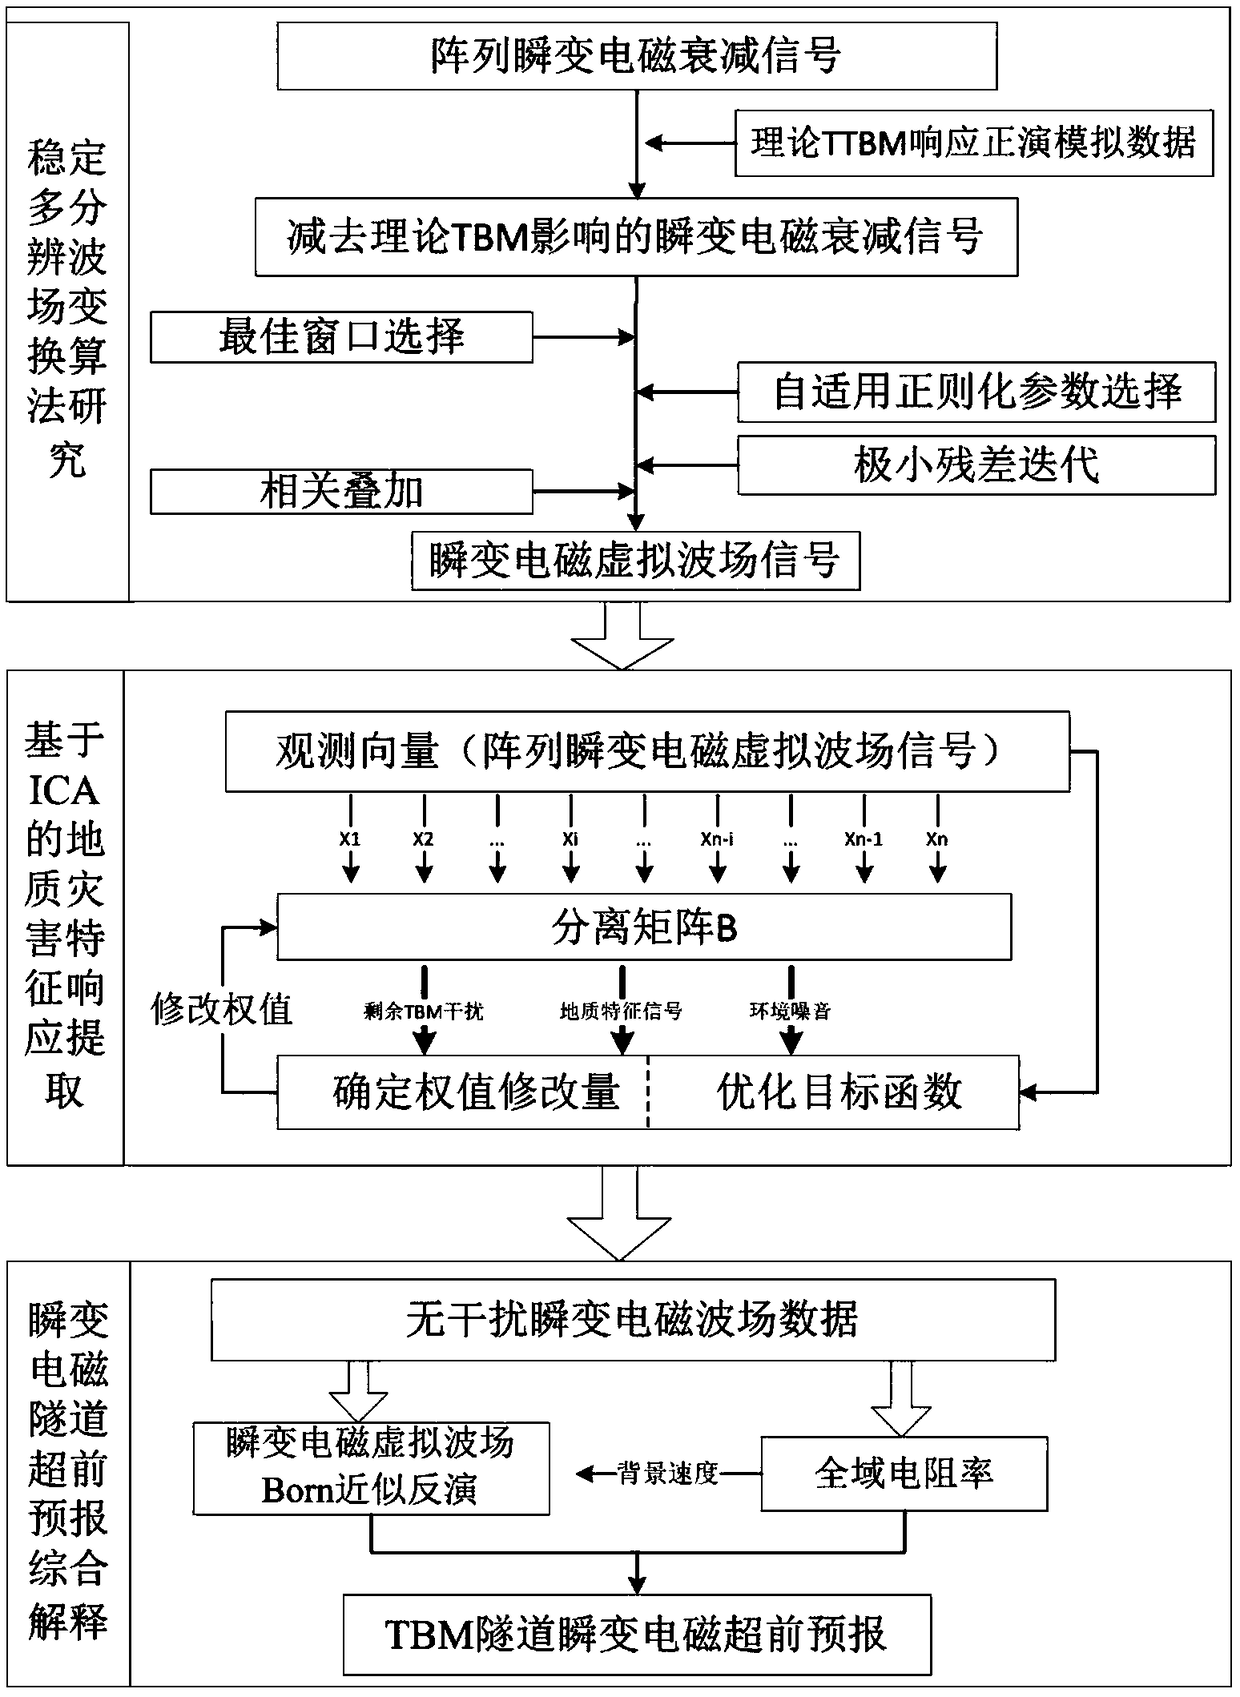 Transient electromagnetic tunnel advanced prediction method under tunnel boring machine construction condition